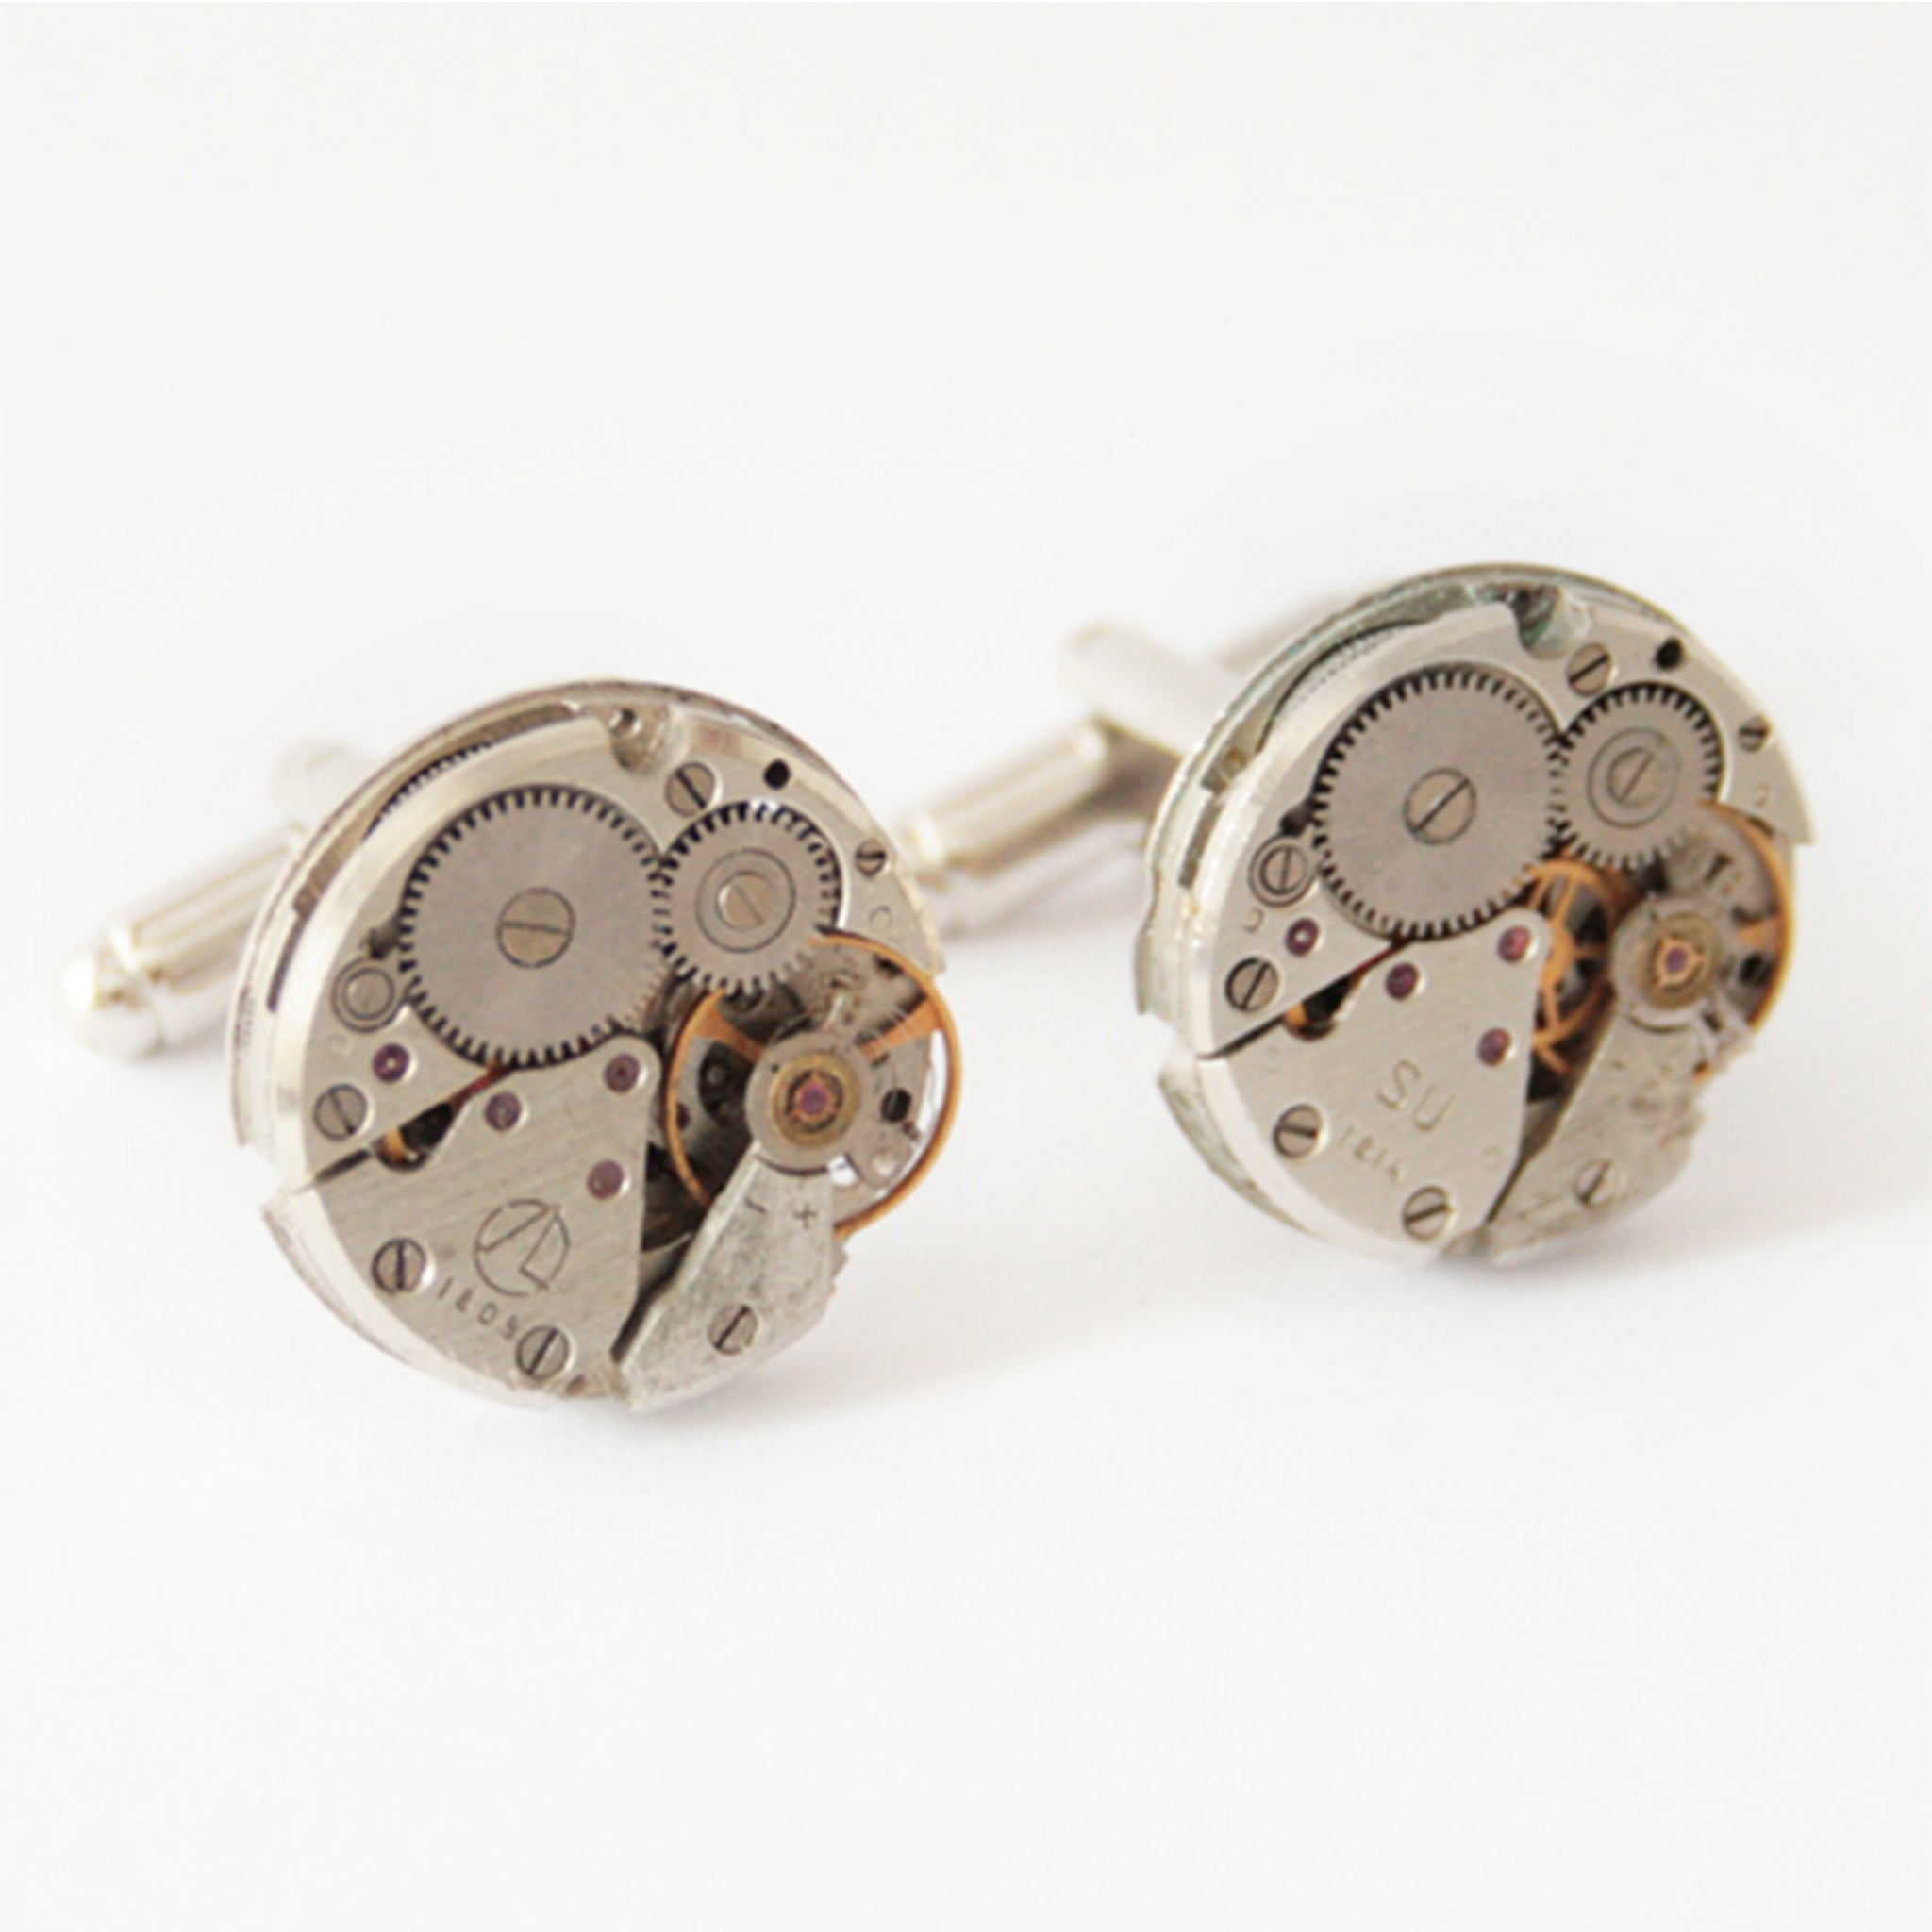 Steampunk Cufflinks for Men made of real watches